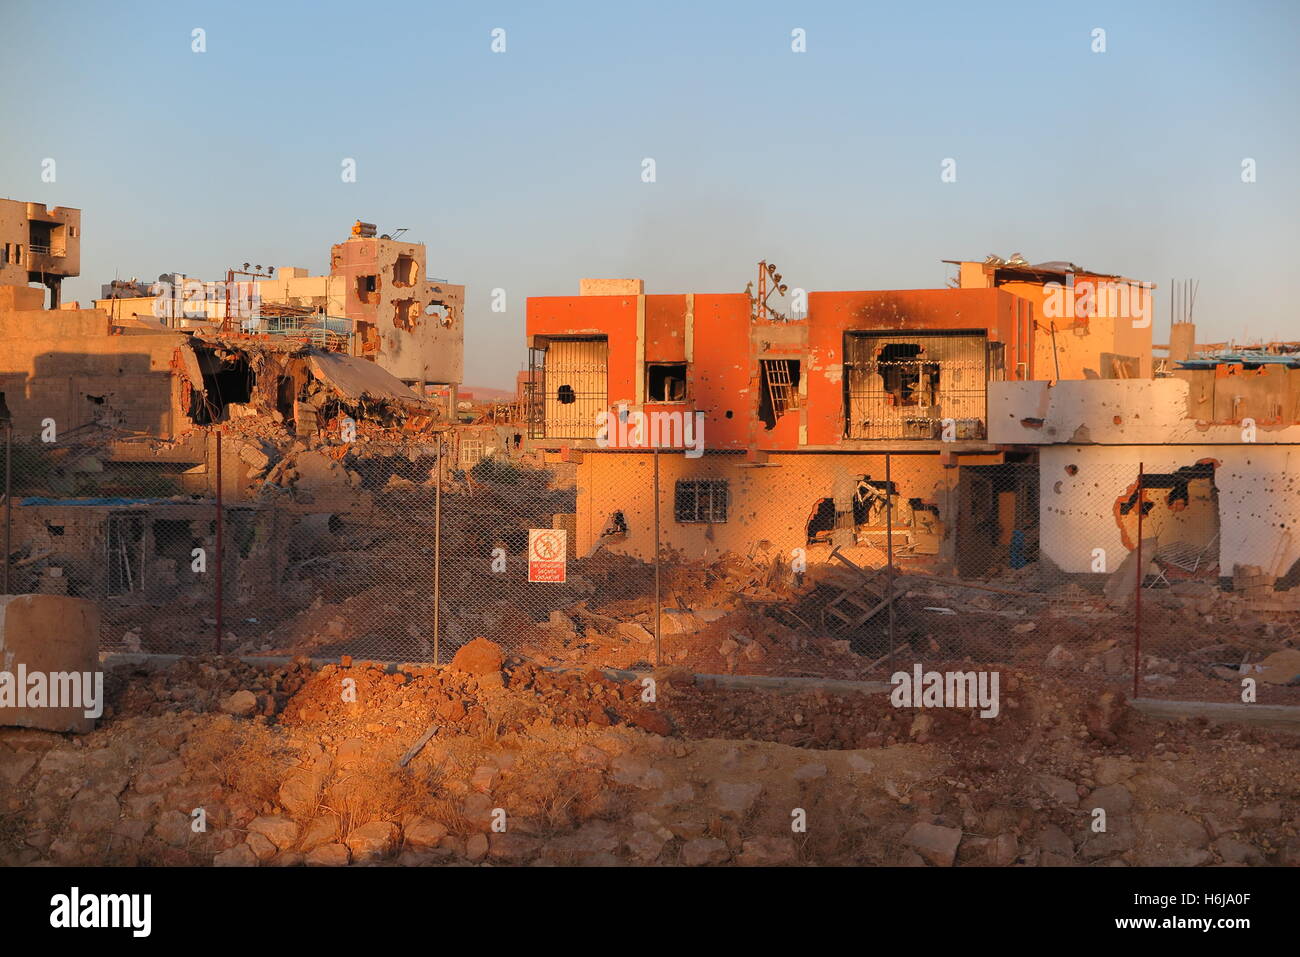 Nusaybin, Turkey. 20th Oct, 2016. View of the destroyed and closed down district Abdul Qadir Pasha in Nusaybin, Turkey, 20 October 2016. Whole districts of Kurdish cities in Turkey are destroyed, the displaced fear the upcoming winter. Fear, anger and hopelesness reign amongst the Kurds, as hardly anybody is interested in their fate. PHOTO: CAN MEREY/dpa/Alamy Live News Stock Photo